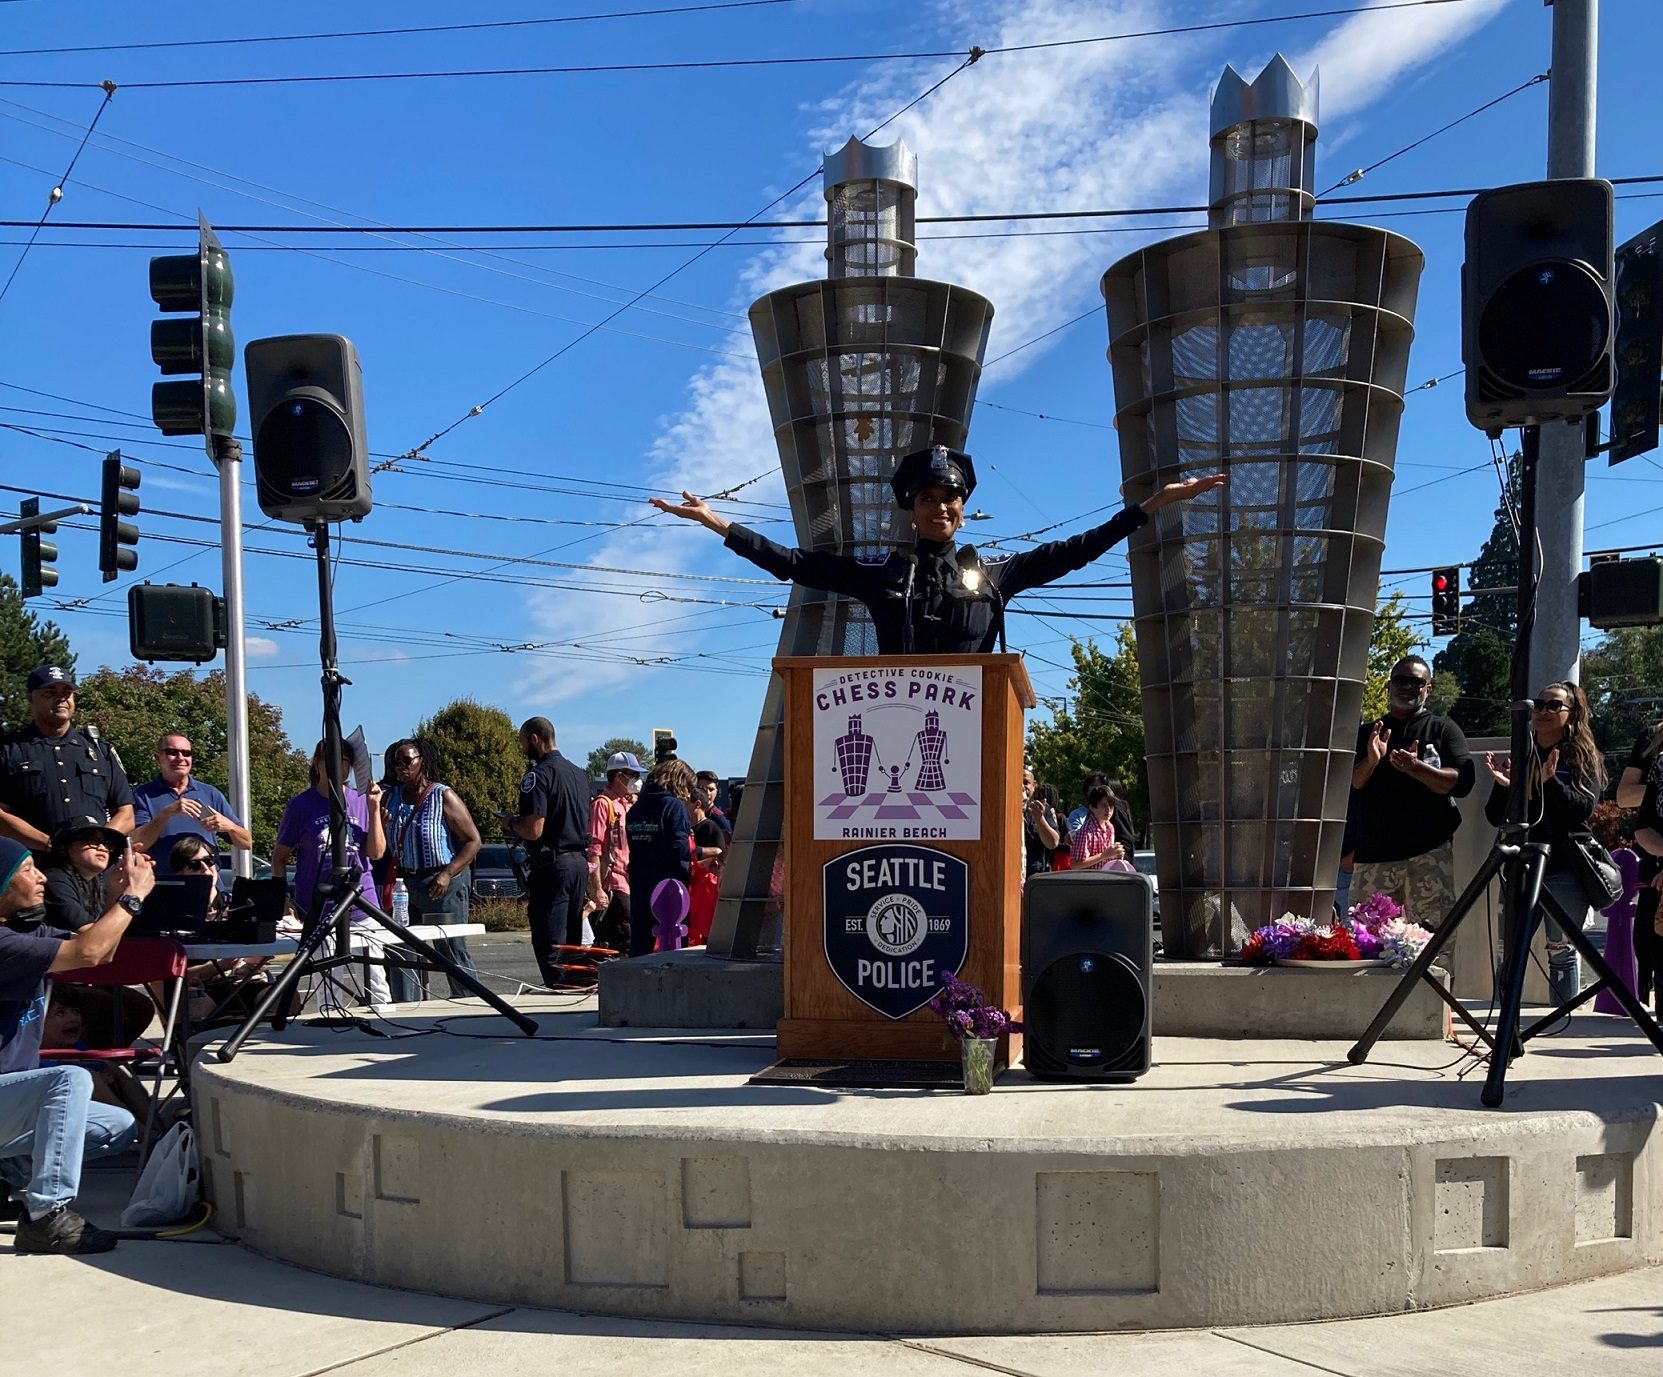 Detective Cookie takes in the moment while speaking at a podium at the newly opened chess park. Detective Cookie stands with her arms raised high in celebration, with other attendees visible in the background. Two large king and queen artistic statues are also in the background.